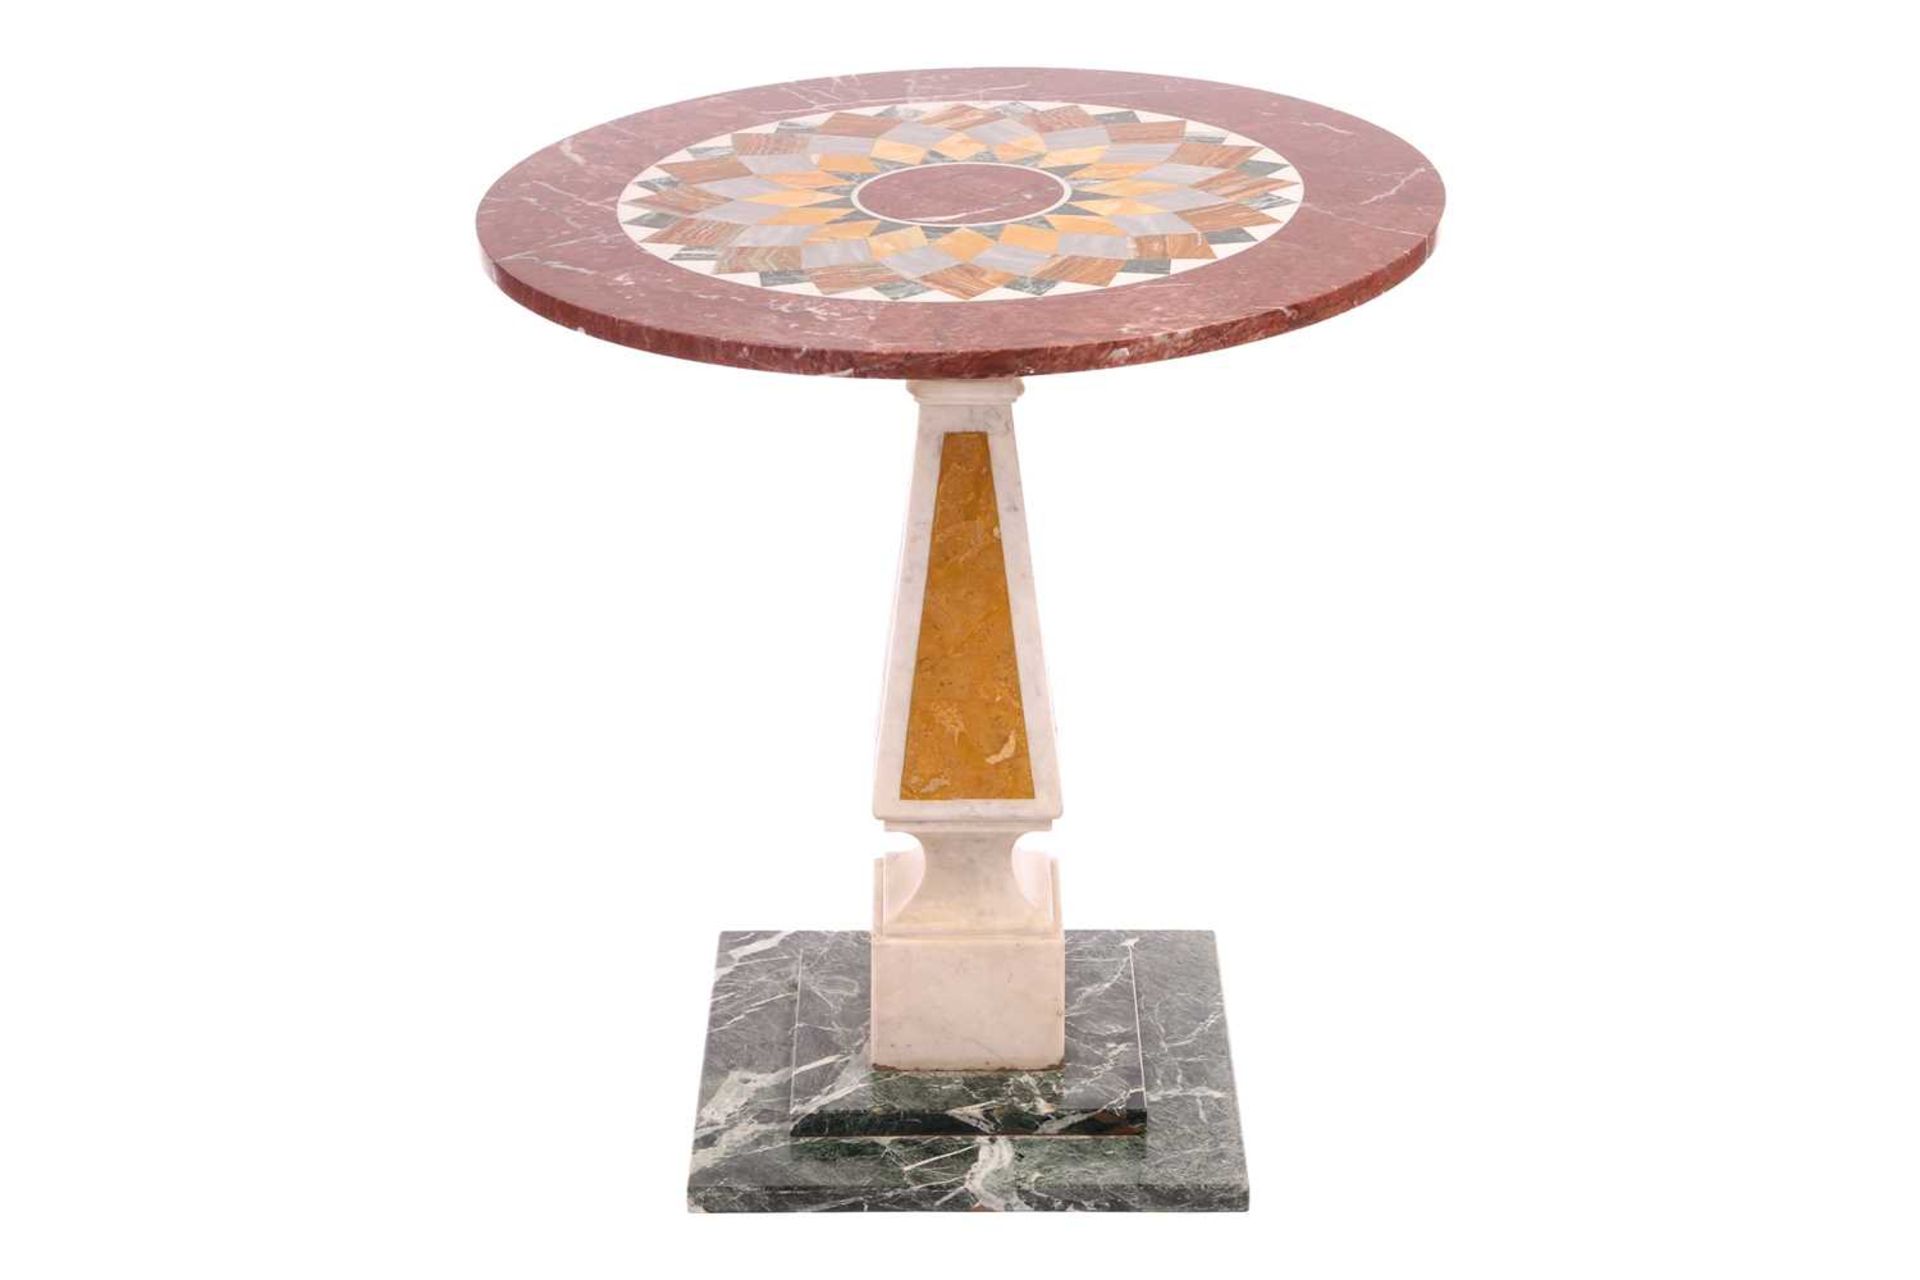 A circular pietra dura pillar table, 20th century, the top inlaid with a central stylized radiant su - Image 2 of 6